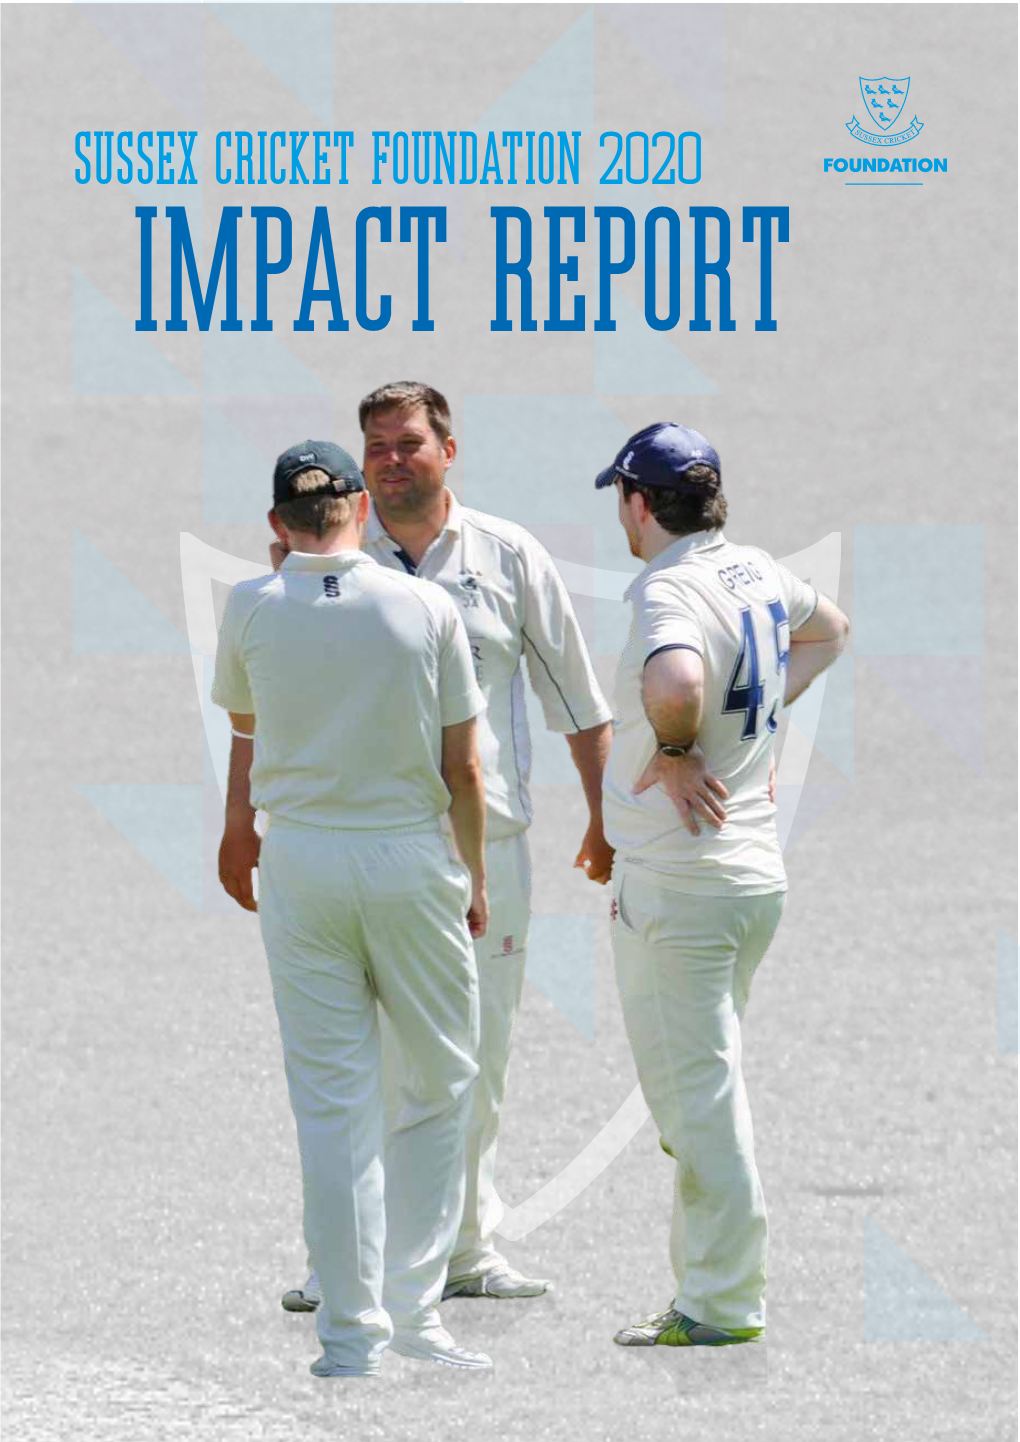 Sussex Cricket Foundation 2020 Impact Report | 2 | 3 the Introduction